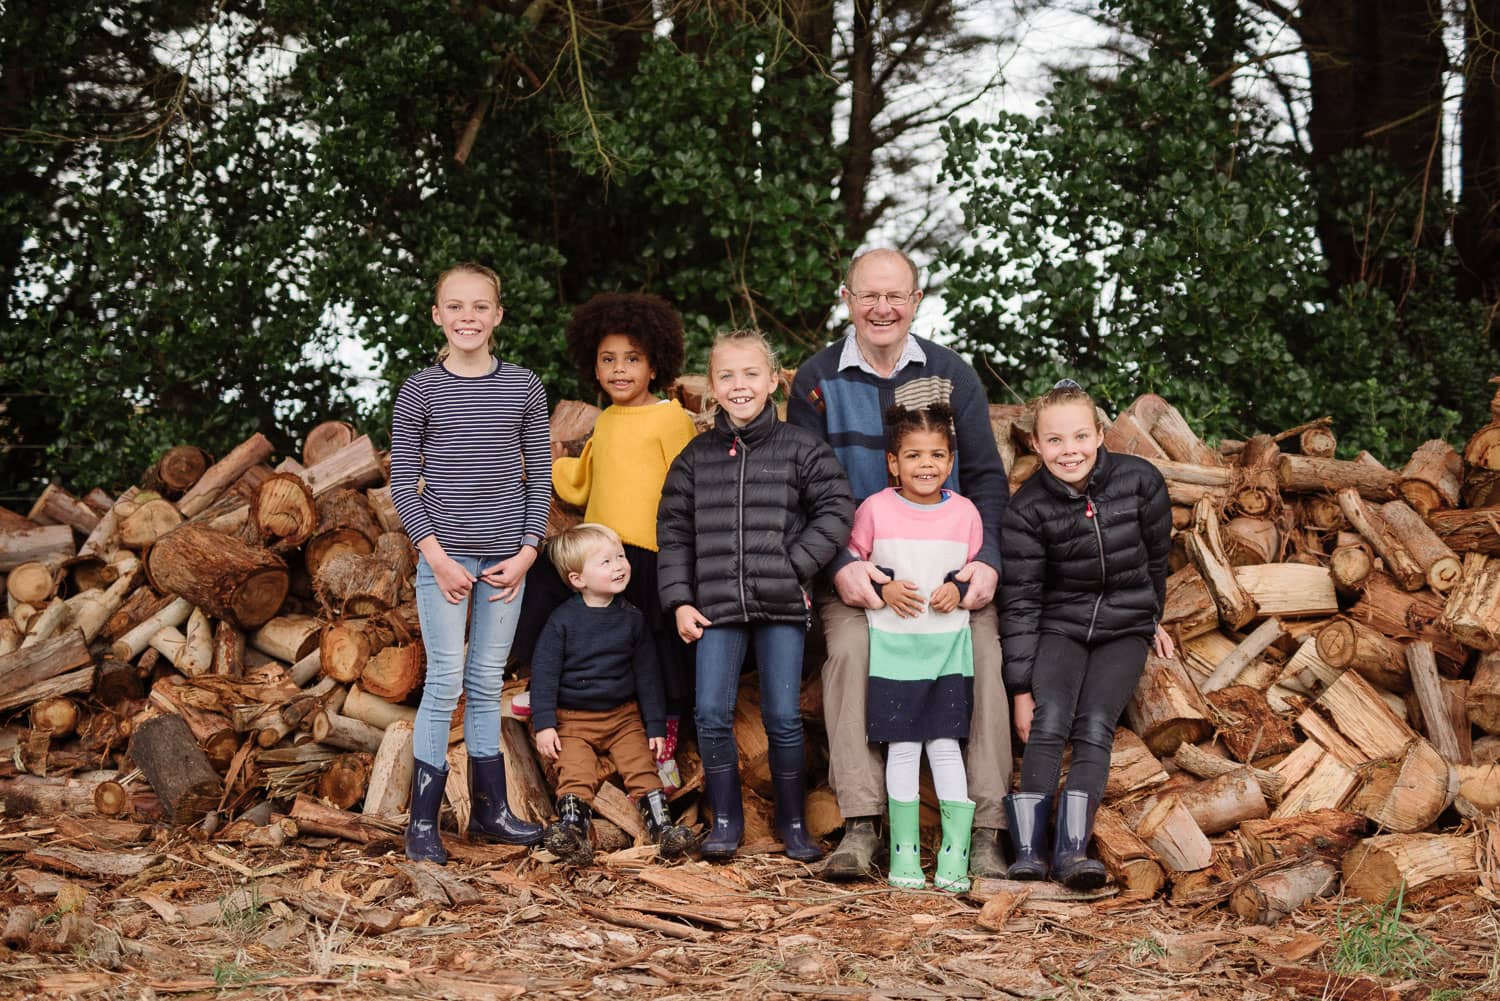 Family portrait on a woodpile